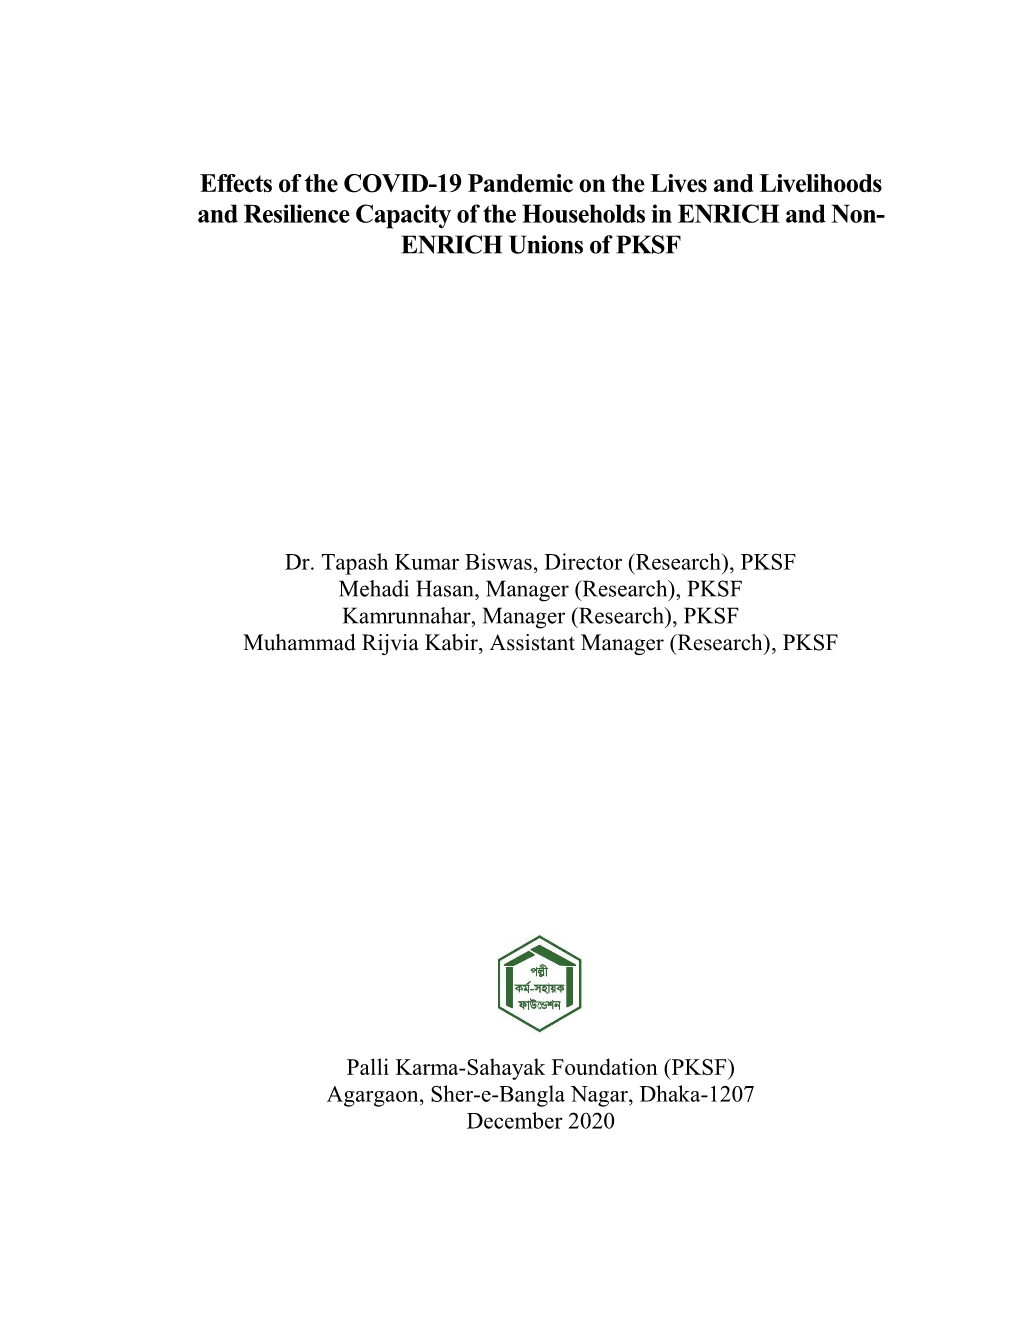 Effects of the COVID-19 Pandemic on the Lives and Livelihoods and Resilience Capacity of the Households in ENRICH and Non- ENRICH Unions of PKSF